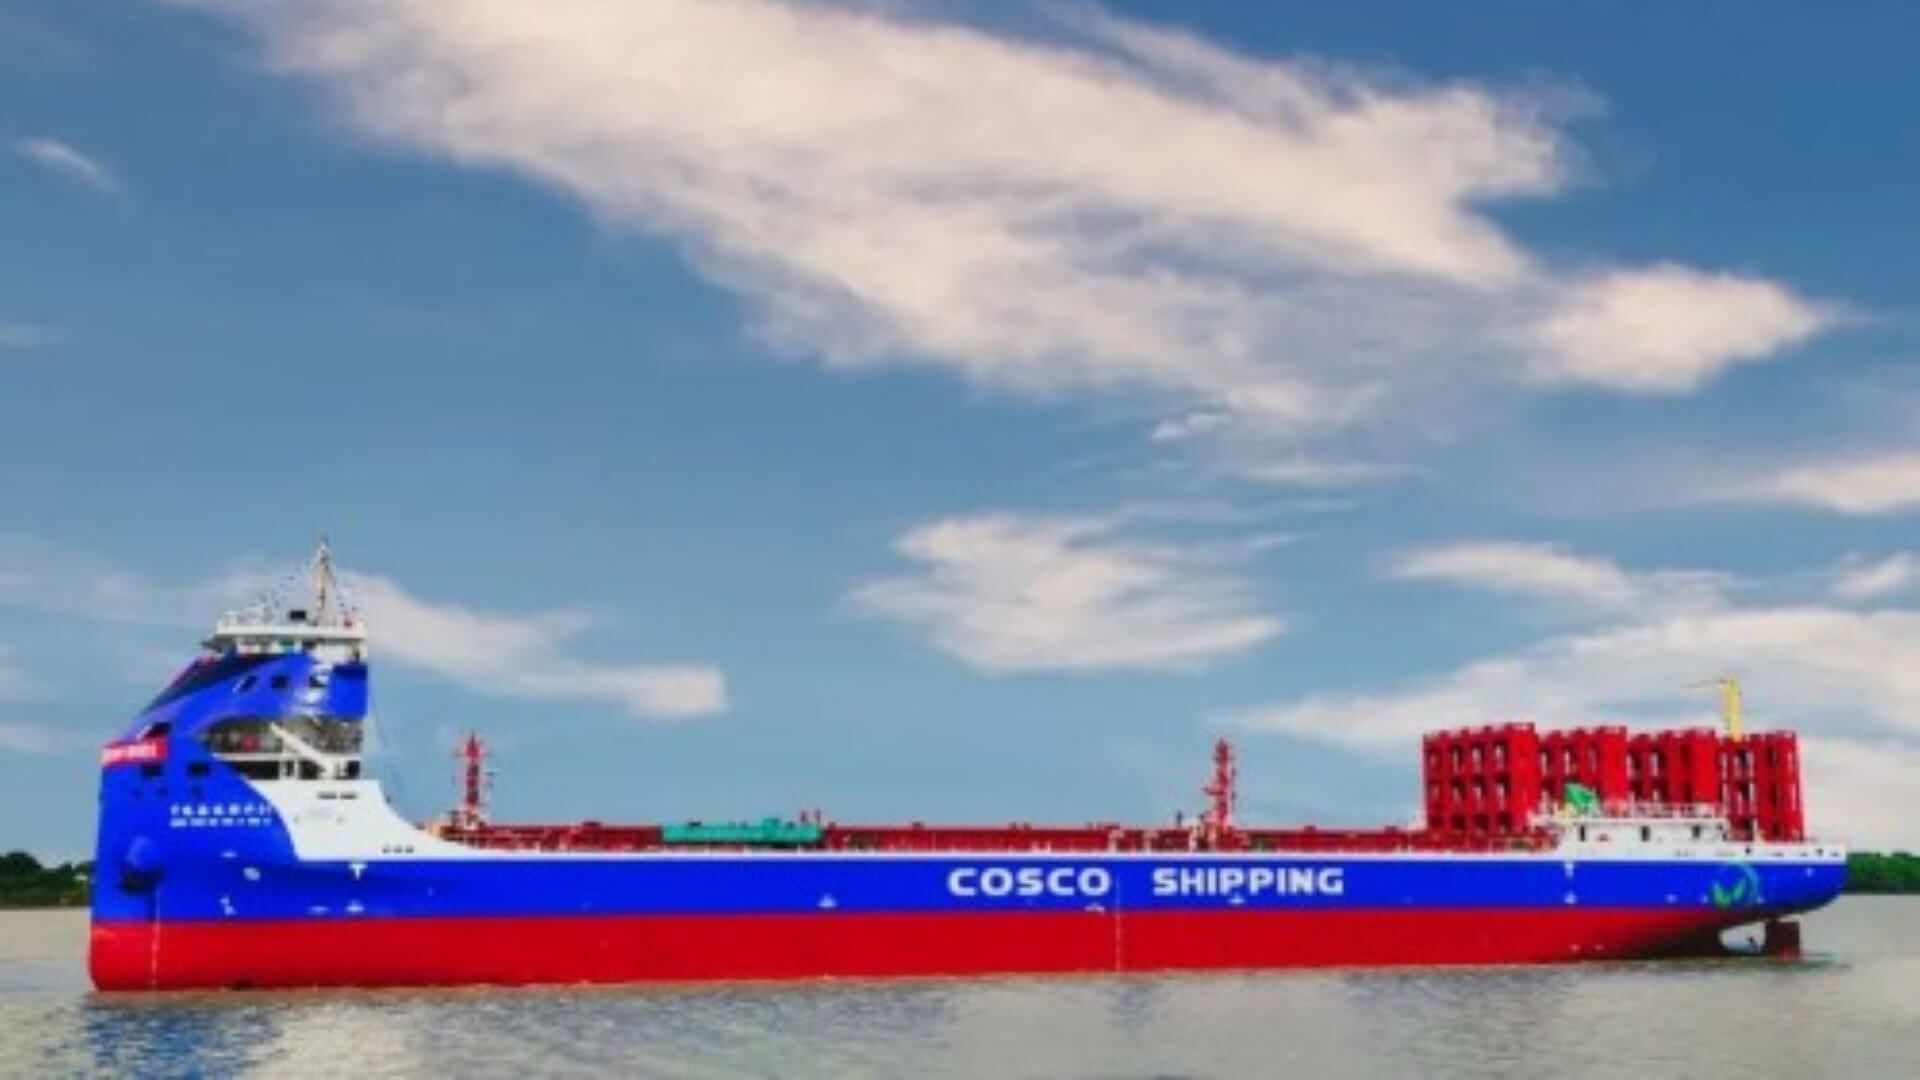 Cosco Shipping’s new electric vessel on the water